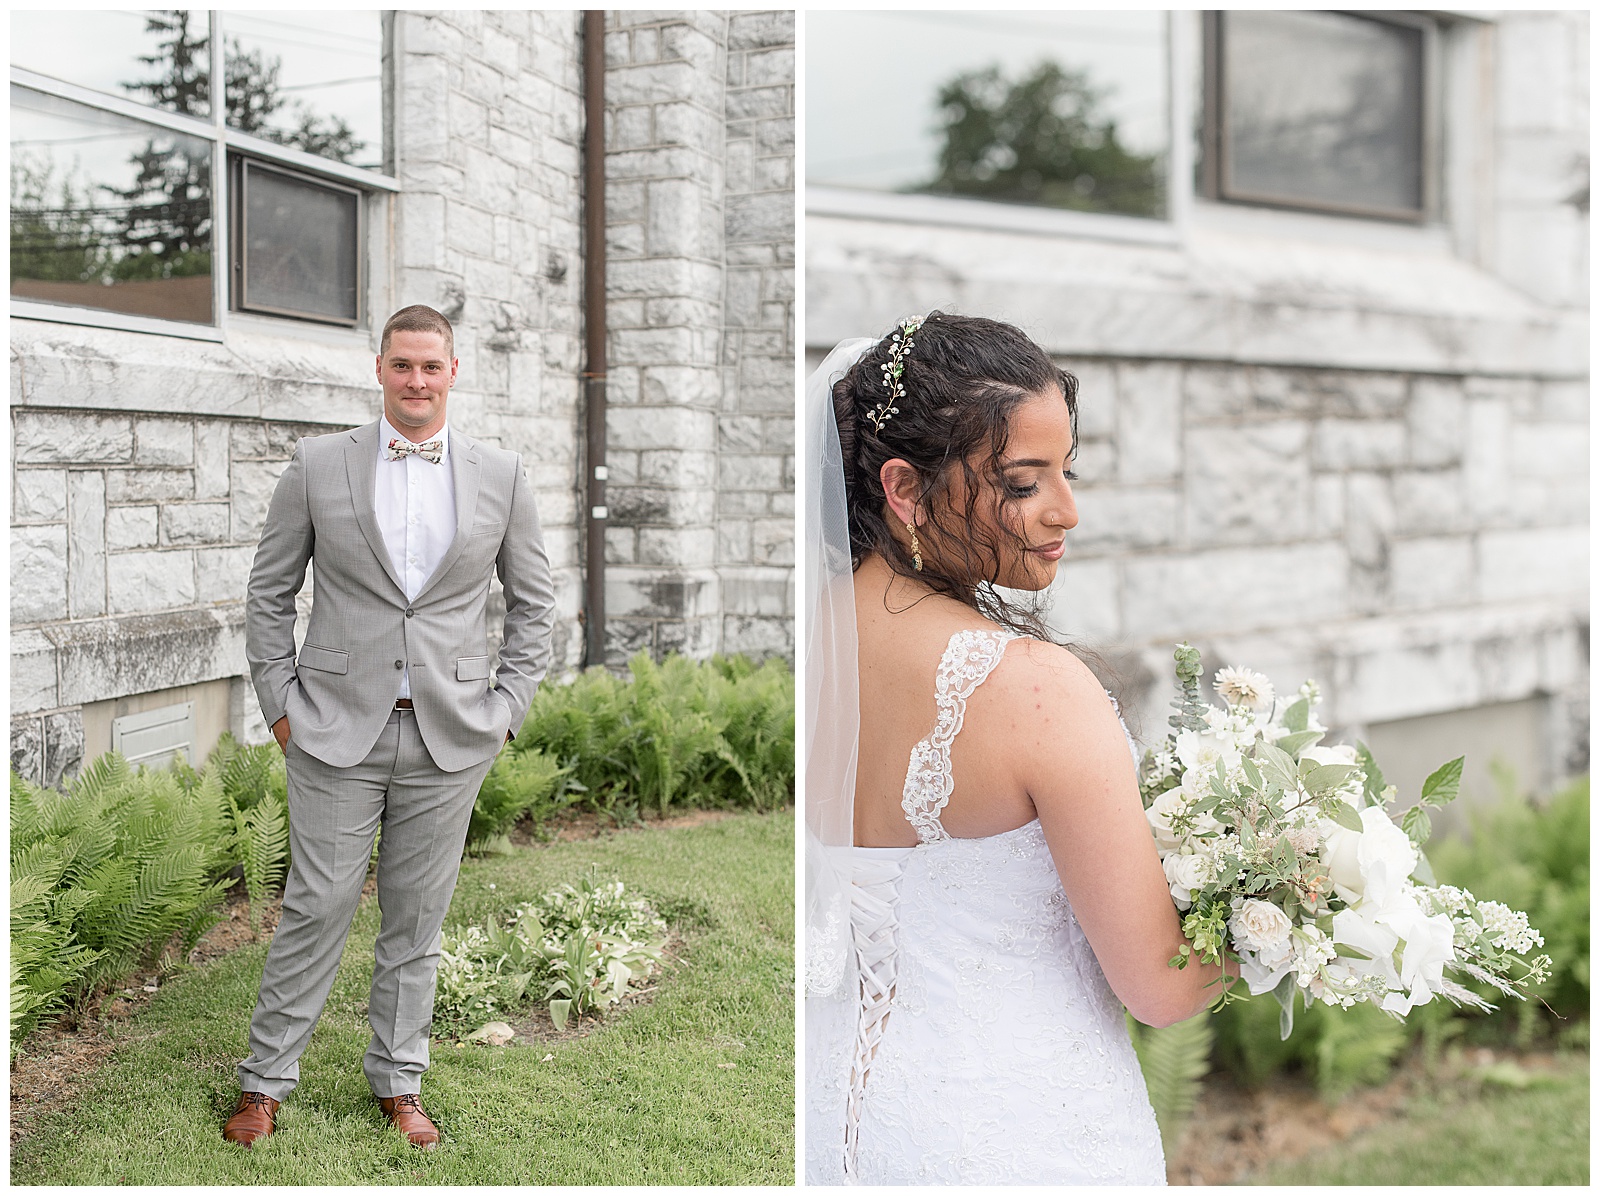 groom posing with his hands in his pockets and bride's back toward camera as she looks over right shoulder